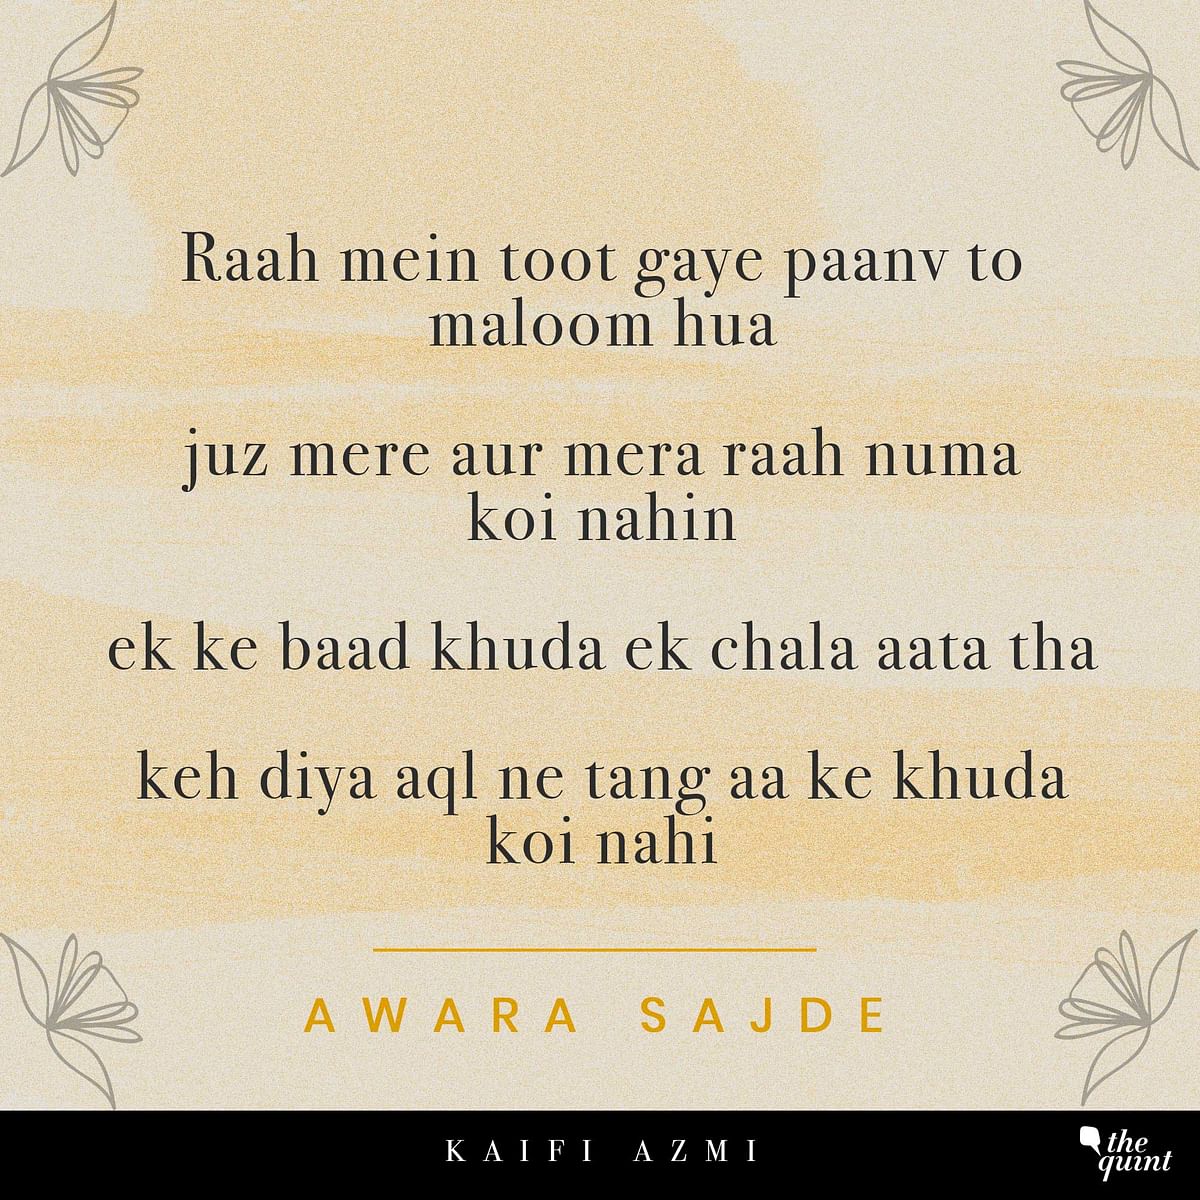 Kaifi Azmi was a child prodigy who wrote his first couplet at the age of 11.